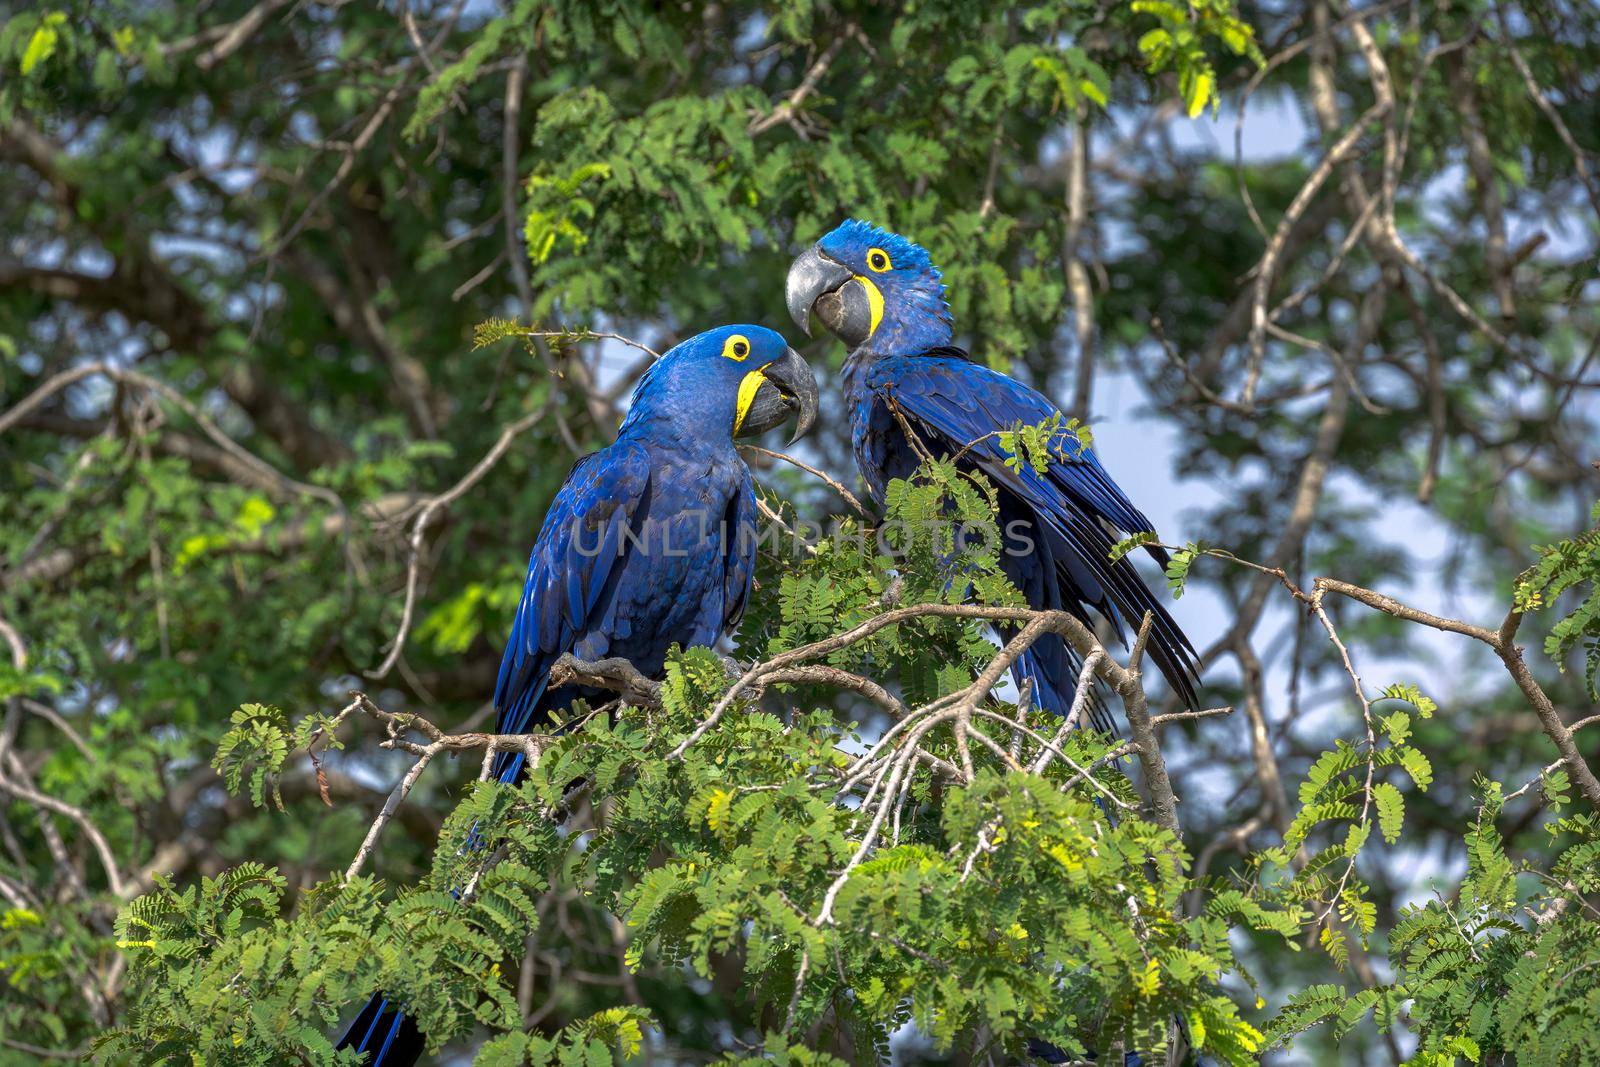 Two bright blue Hyacinth Macaws, Anodorhynchus hyacinthinus, perched in a tree in the Pantanal of Brazil.